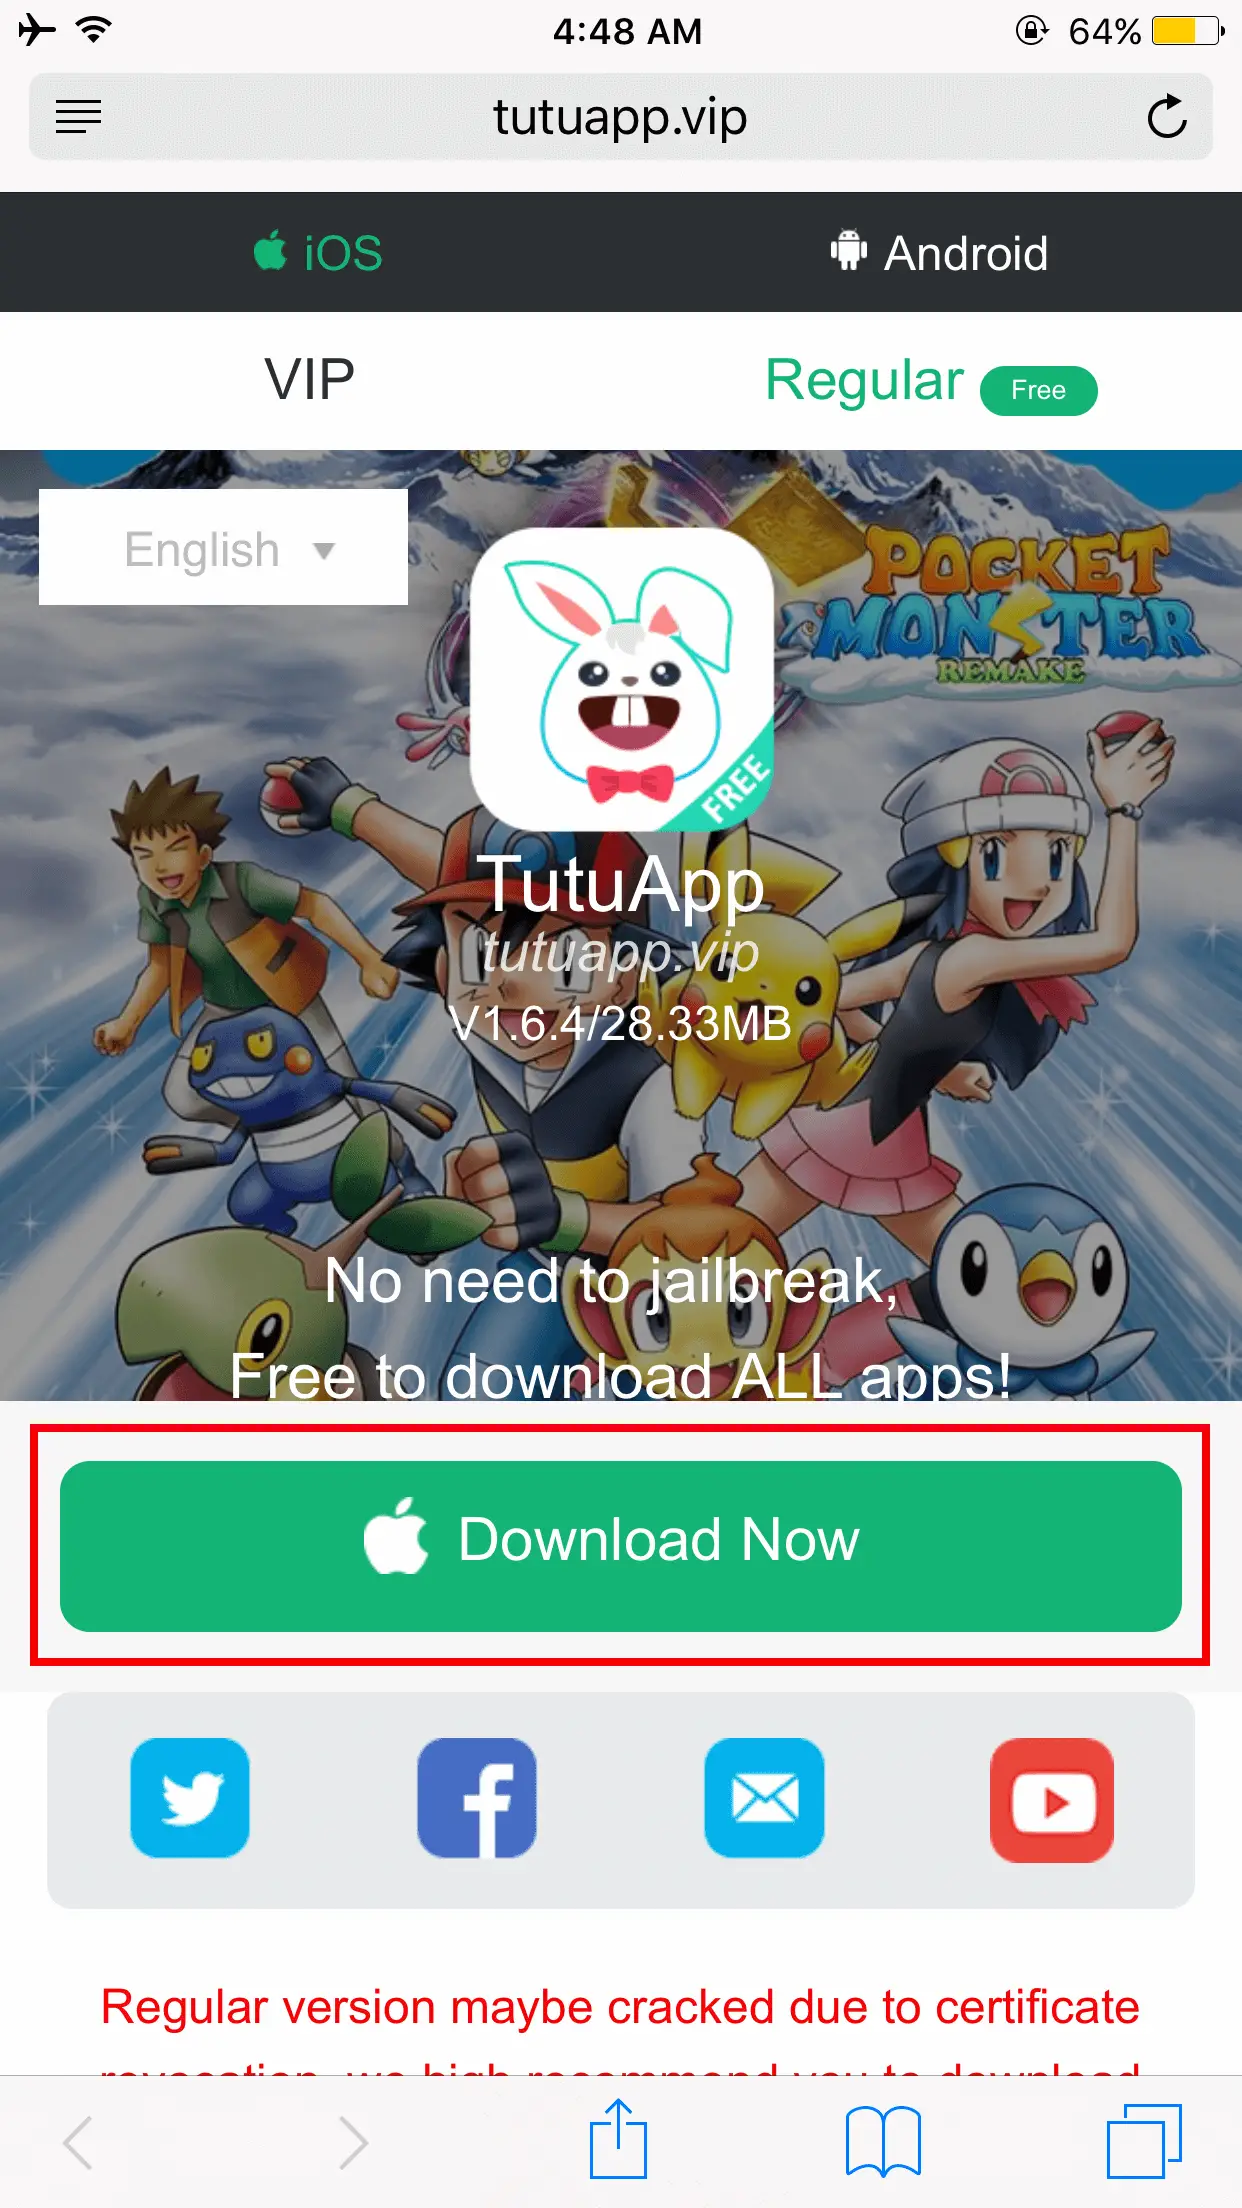 How to Install TuTuApp Helper on iOS 10 (iPhone/iPad) without Jailbreak